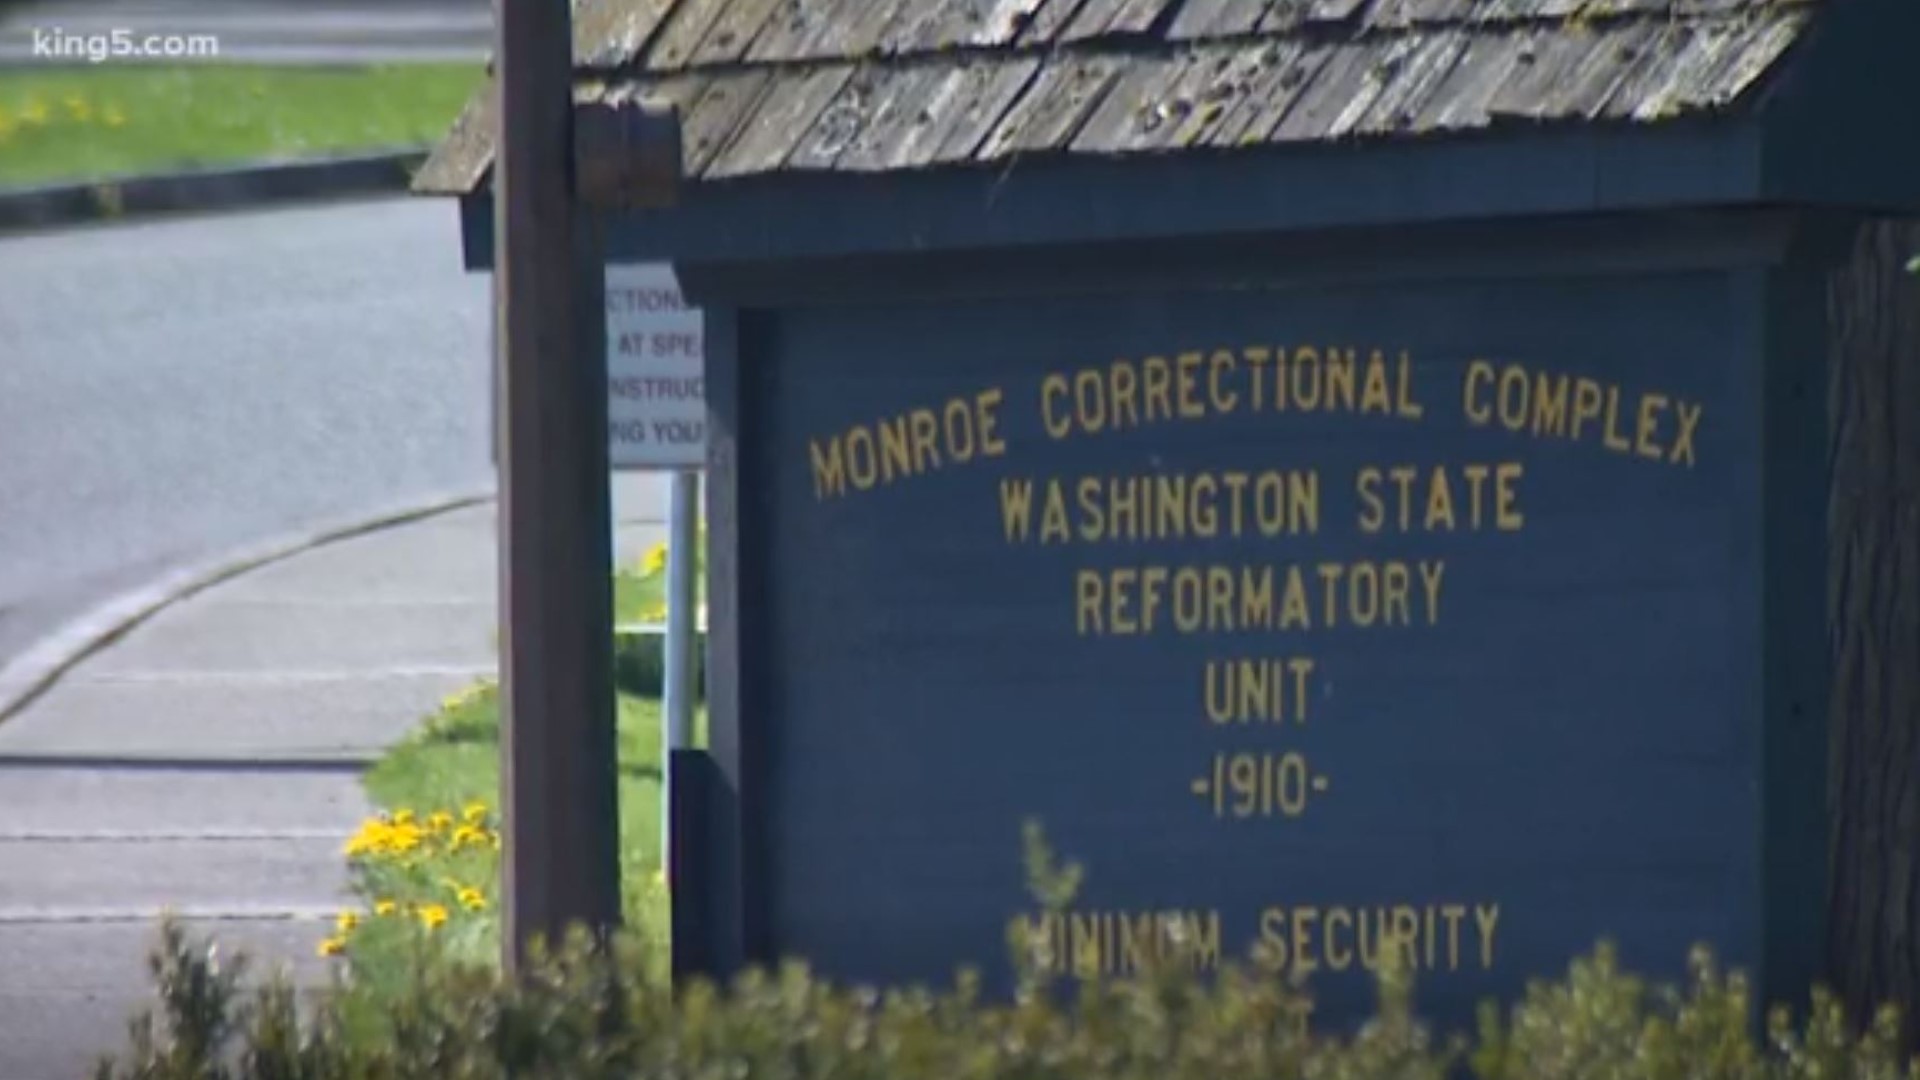 The announcement followed an inmate "demonstration" at Monroe Correctional Complex Wednesday that was related to six inmates testing positive for coronavirus.